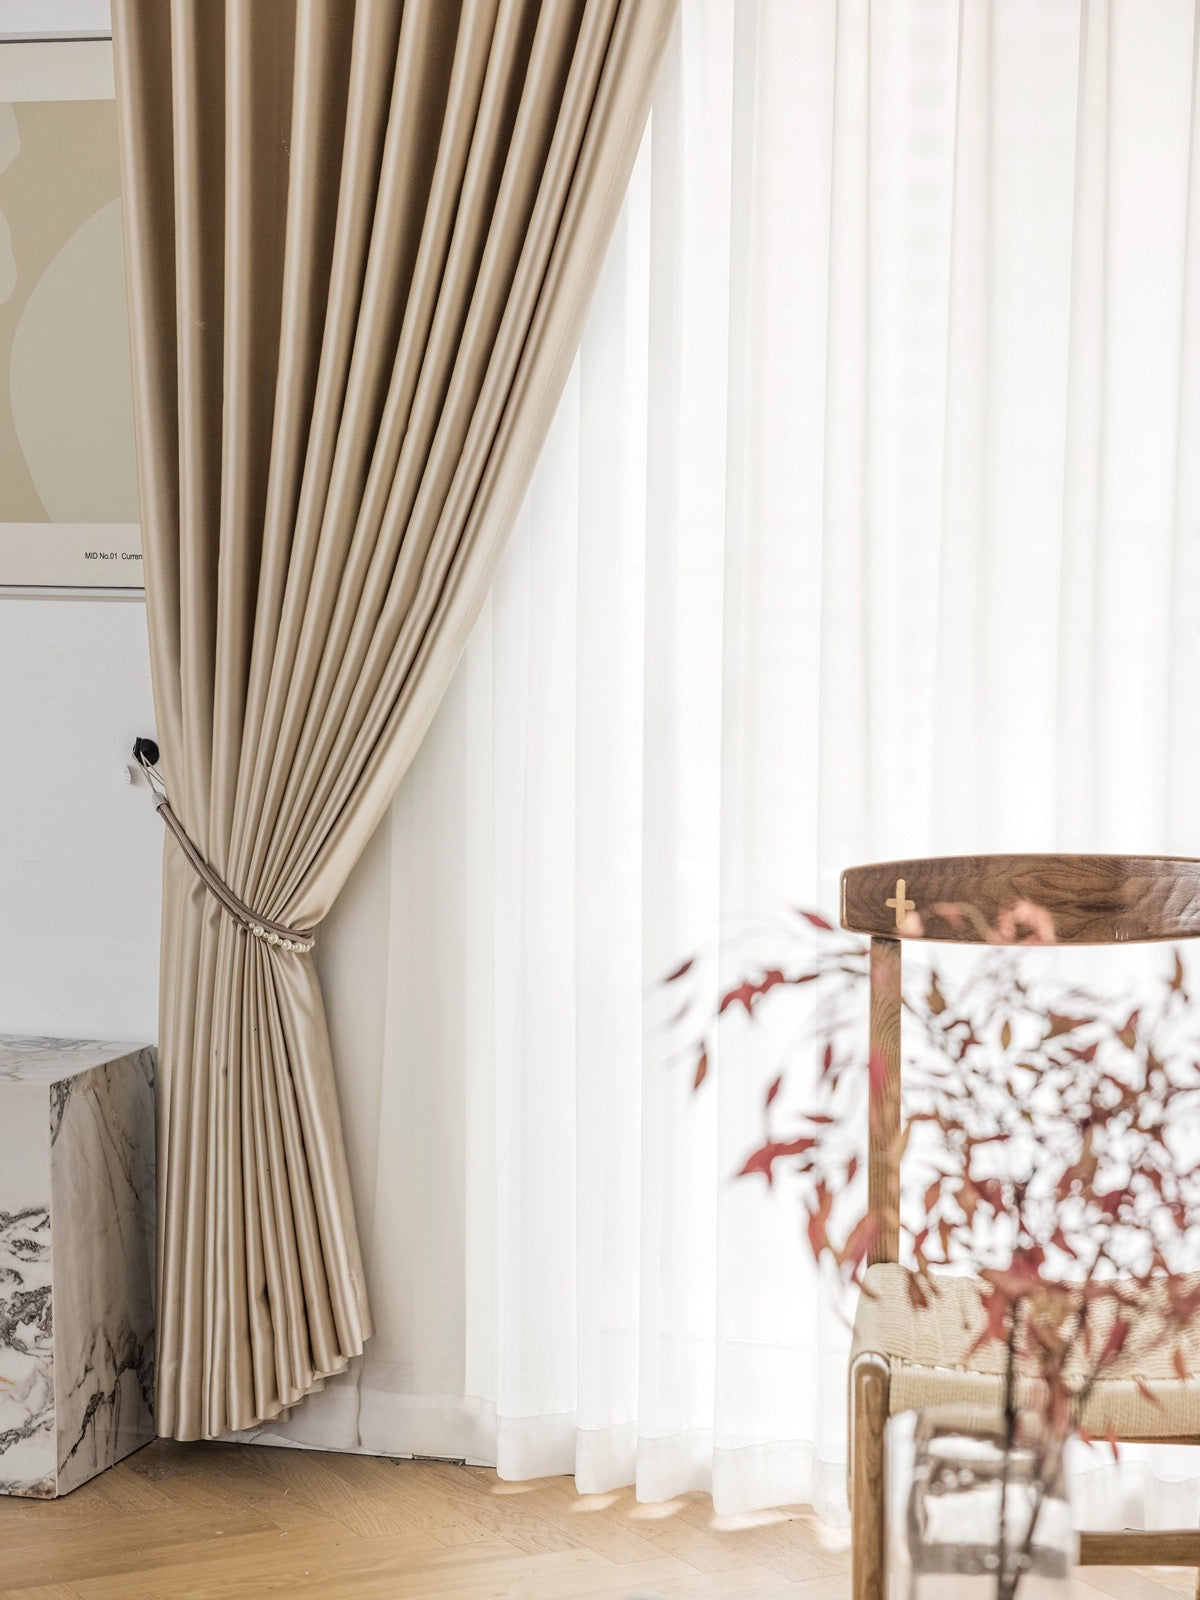 Elegant pleated beige silk drapery alongside sheer white curtains in a luxurious living room setting, emphasizing sophisticated window treatment and interior decor